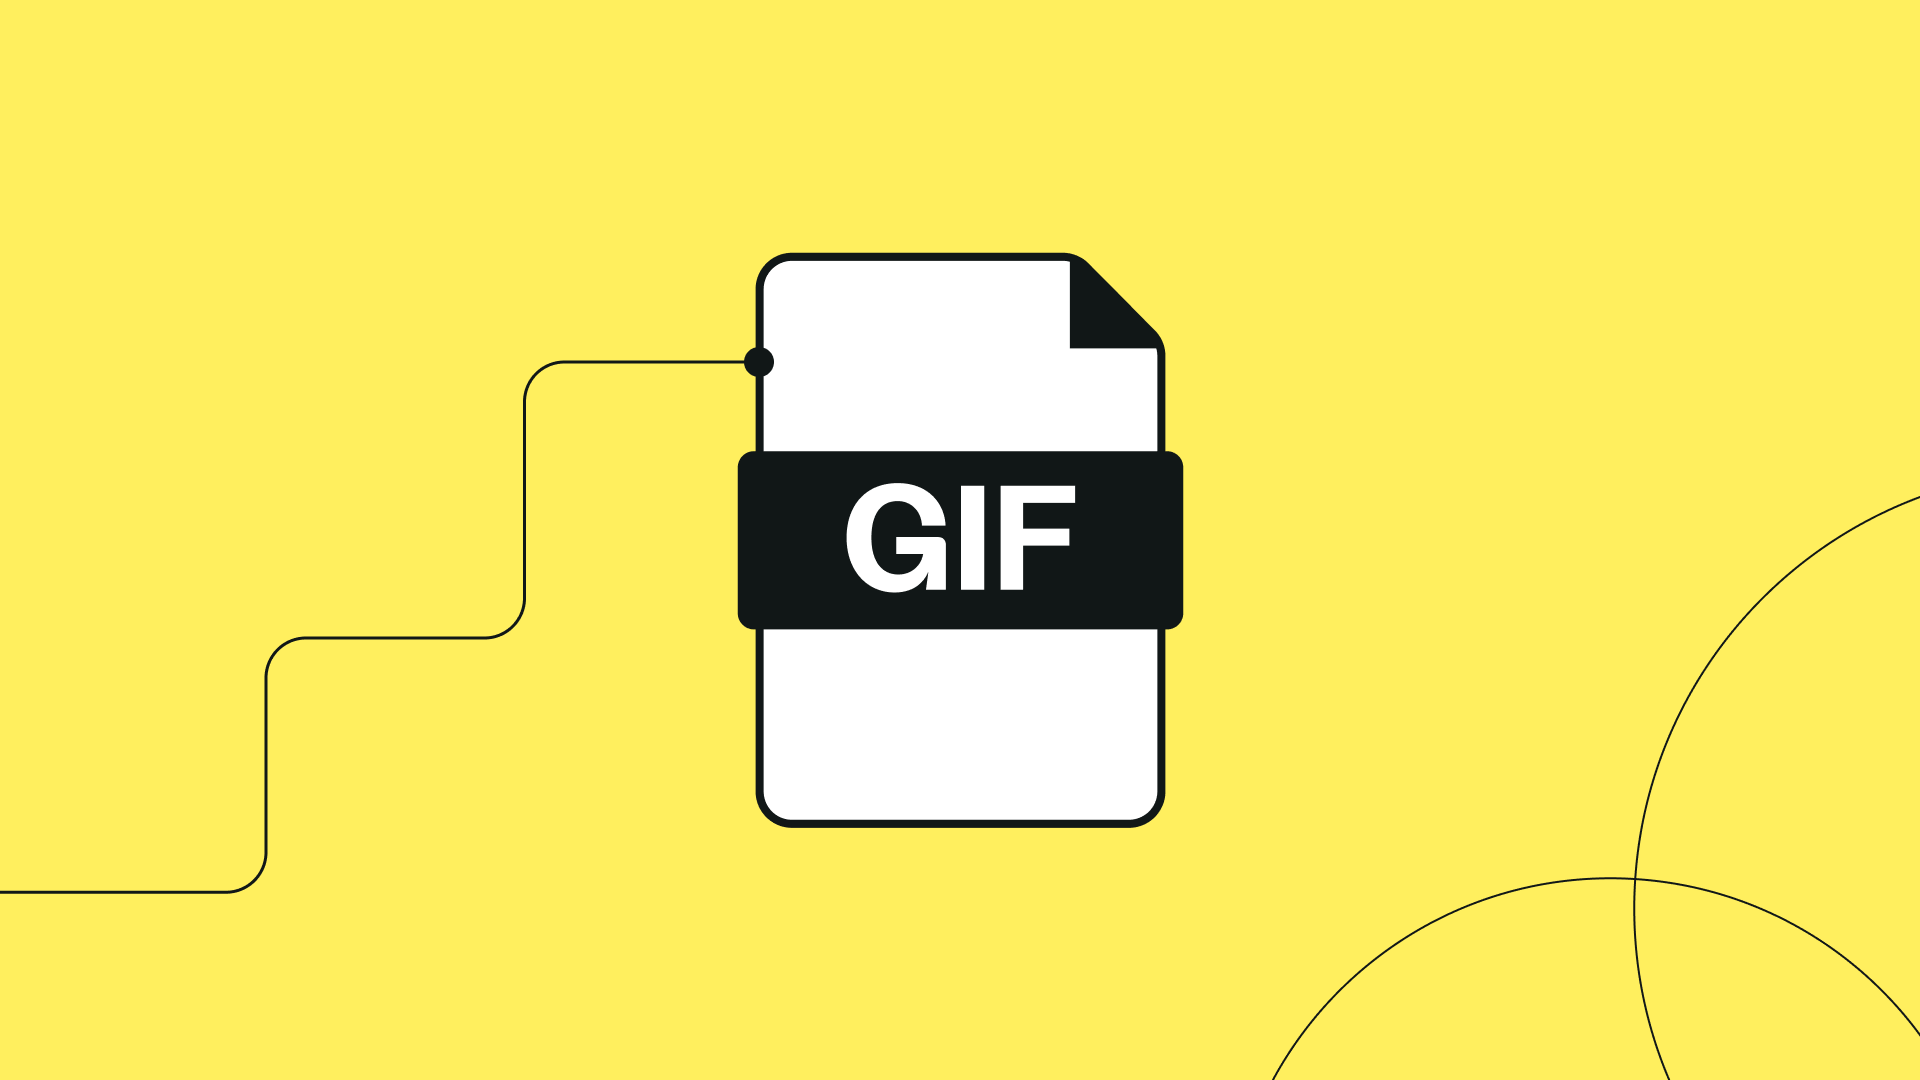 GIF Search: Workflow for Searching and Browsing GIFs - Share your